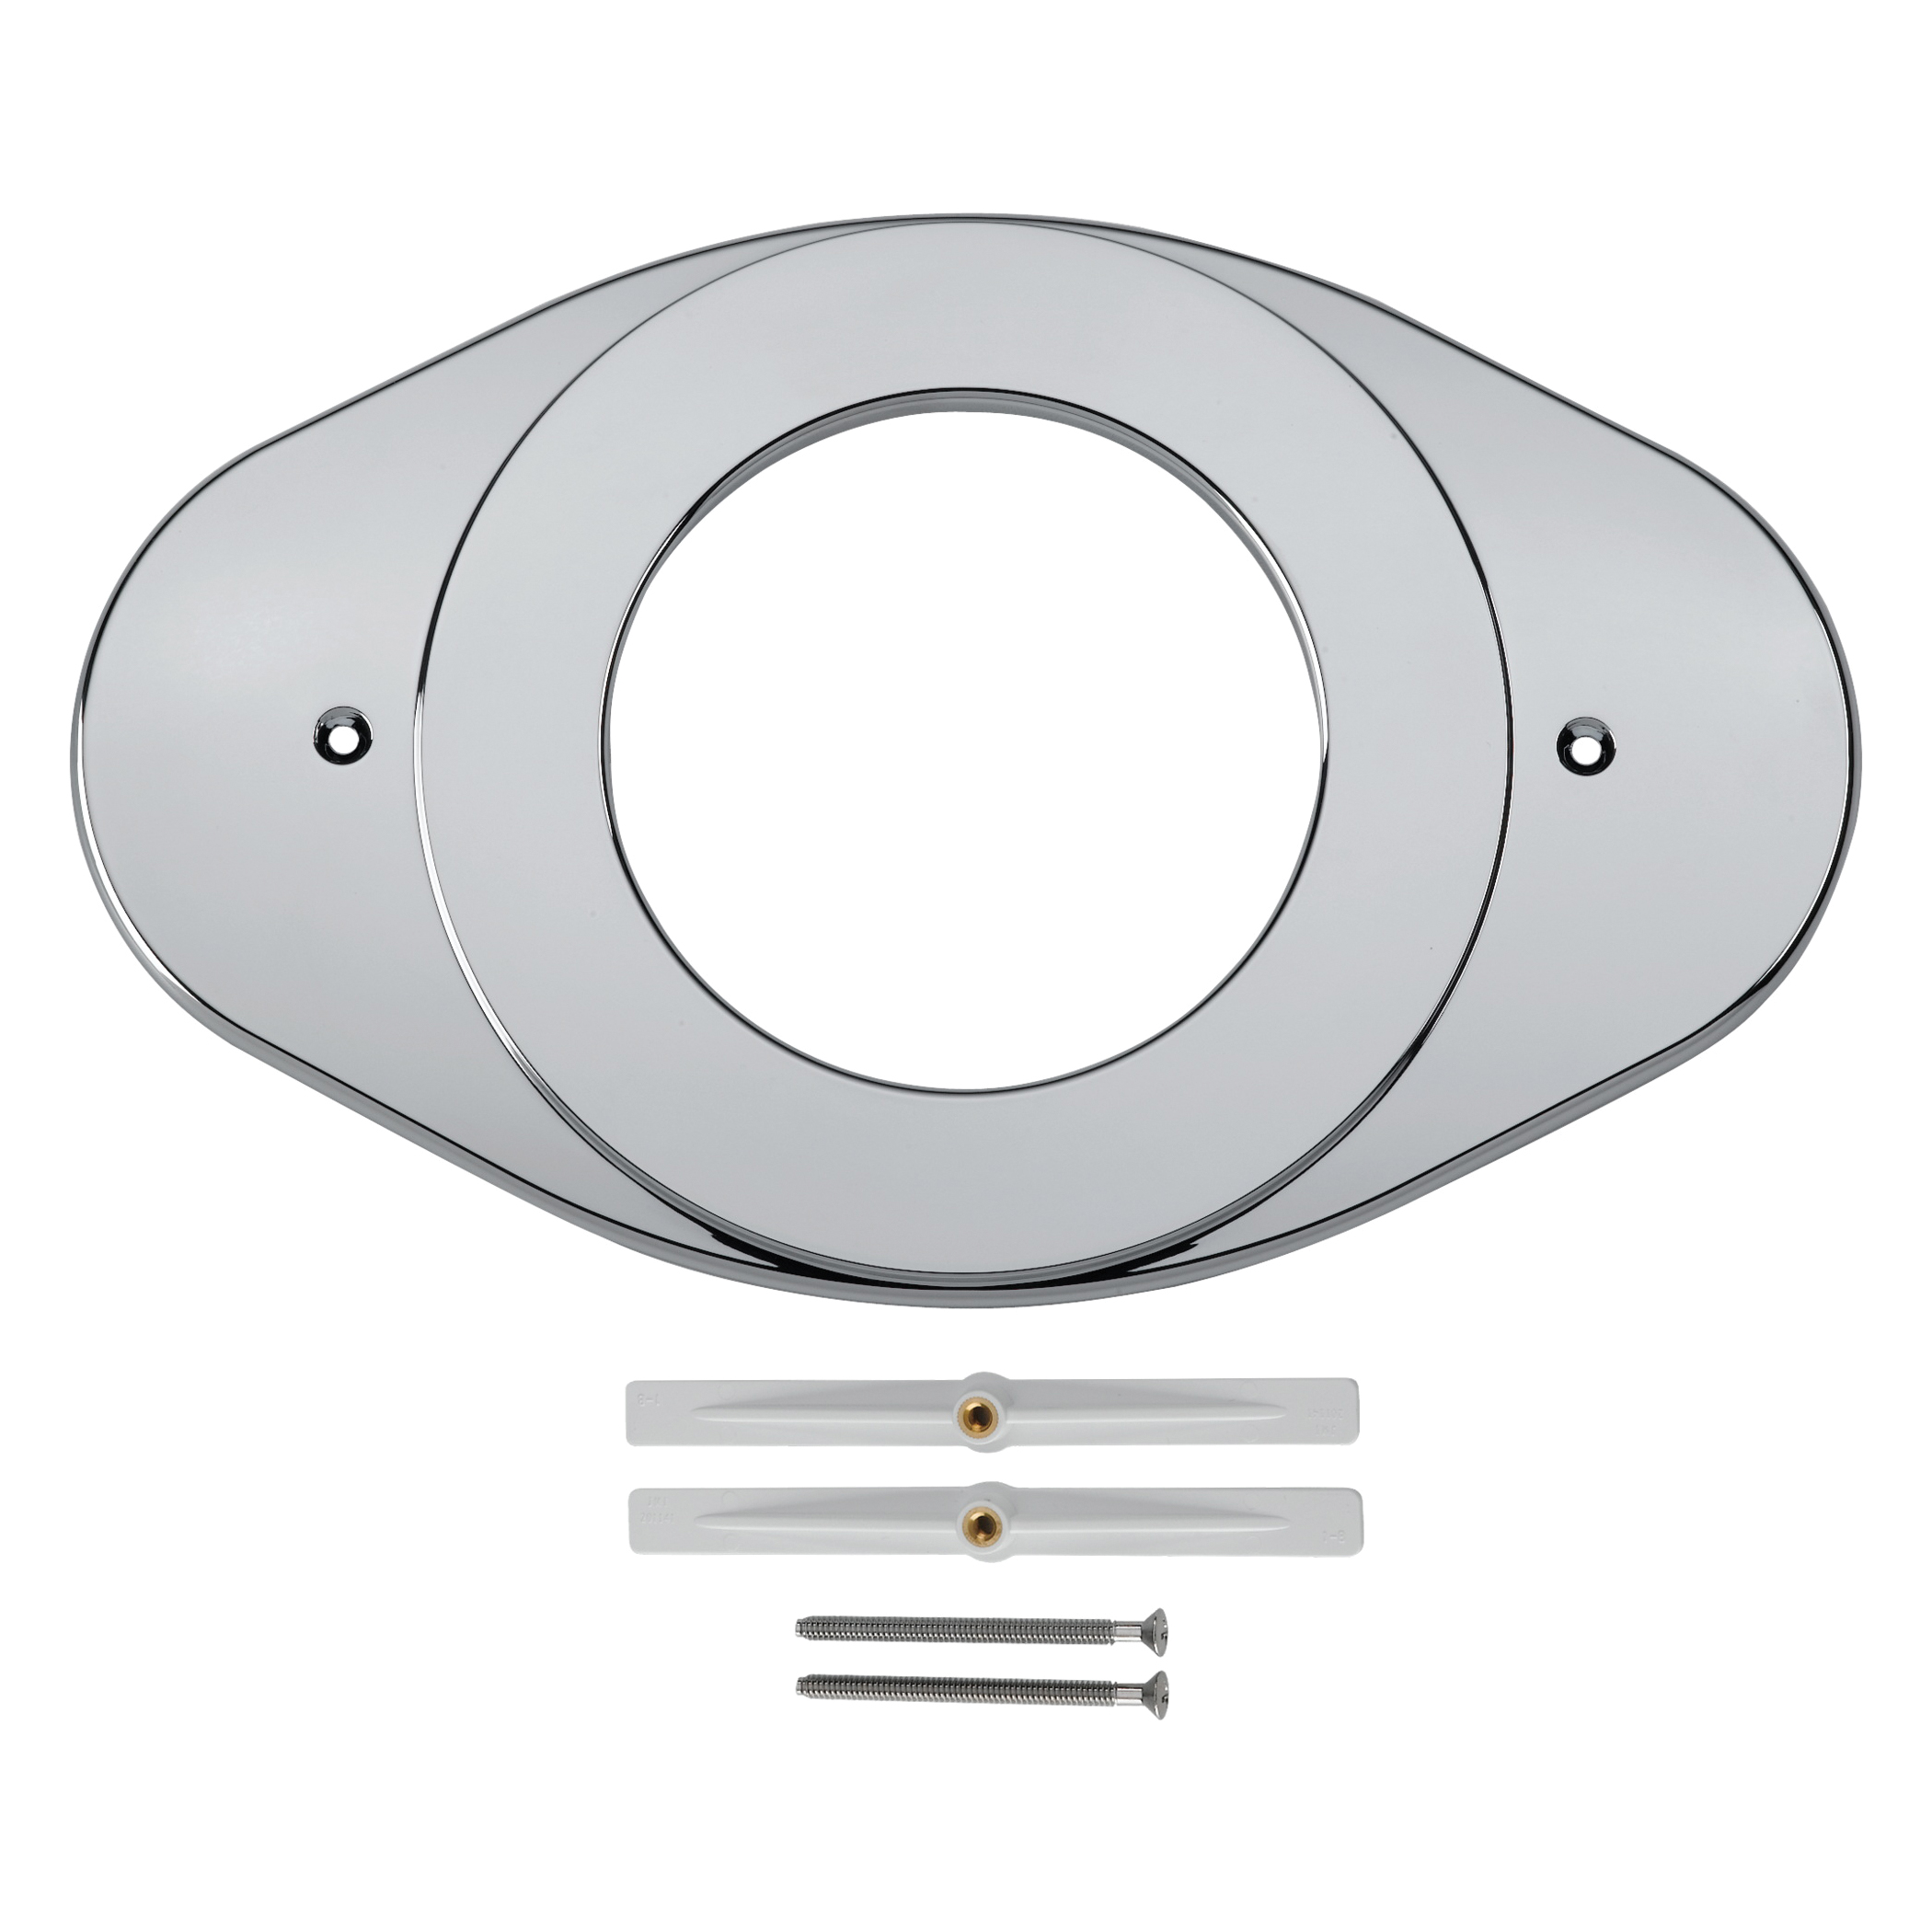 DELTA® RP29827 Replacement Shower Renovation Cover Plate, 5-1/8 in, 13 in L x 8-1/8 in H, Brass, Polished Chrome, Import, Residential